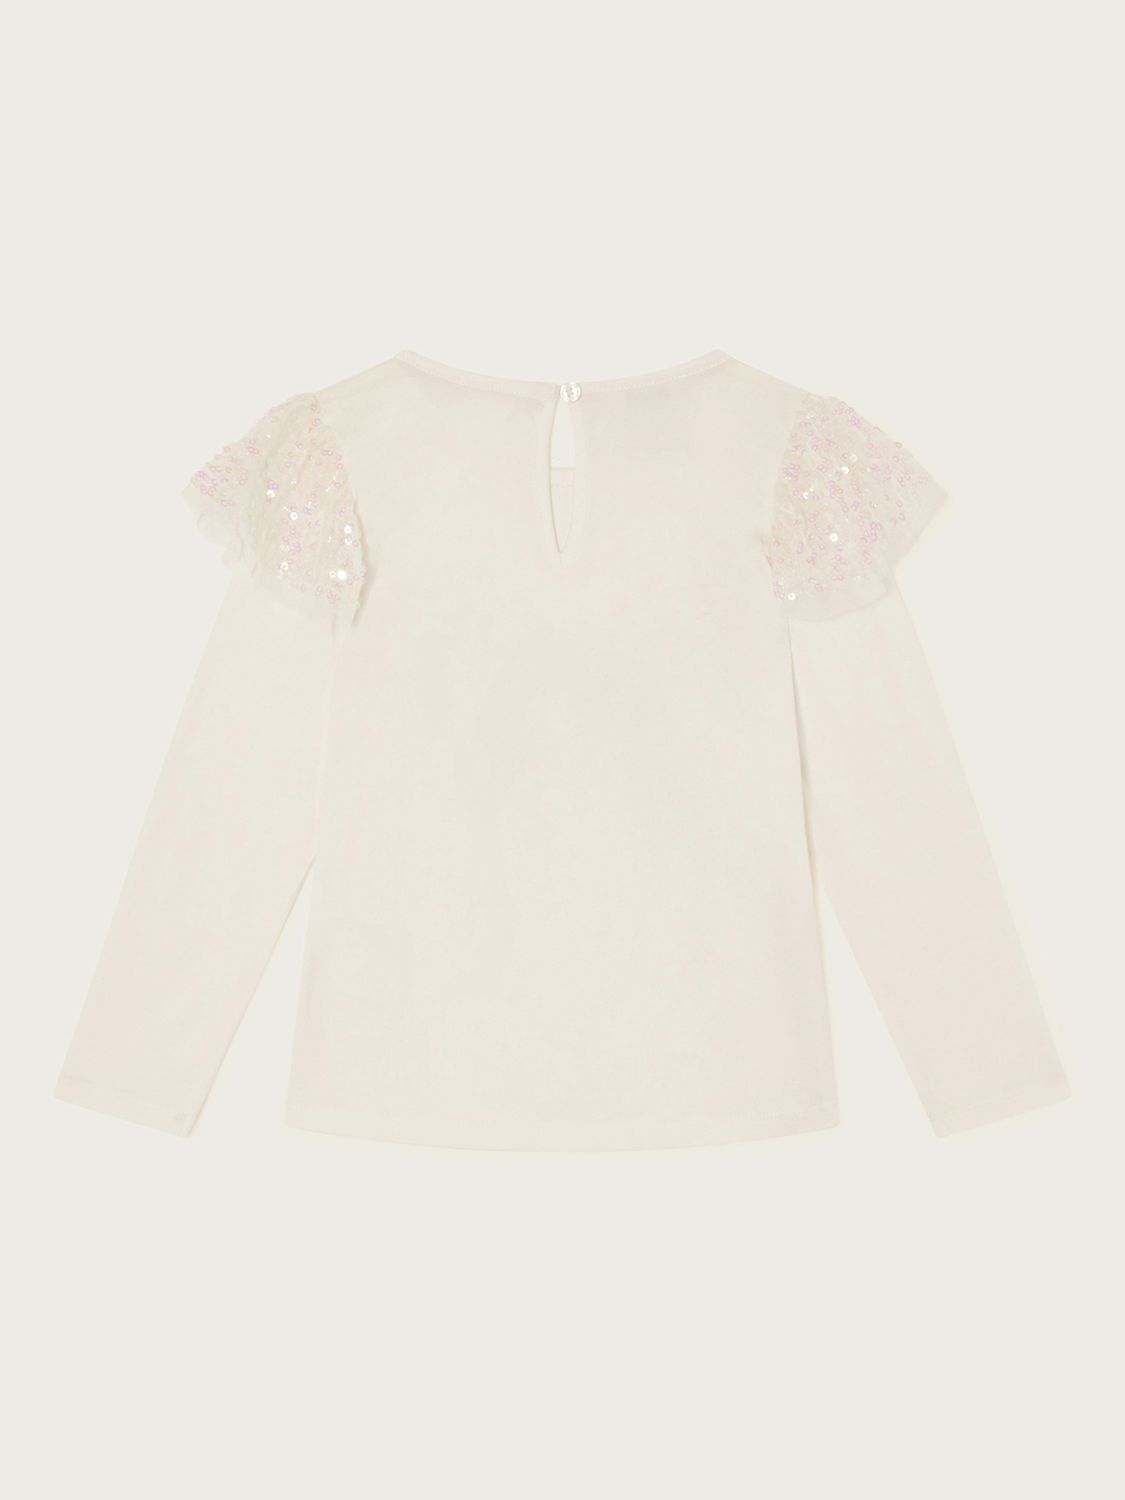 Buy Monsoon Kids' Sequin Bow Top, Ivory Online at johnlewis.com